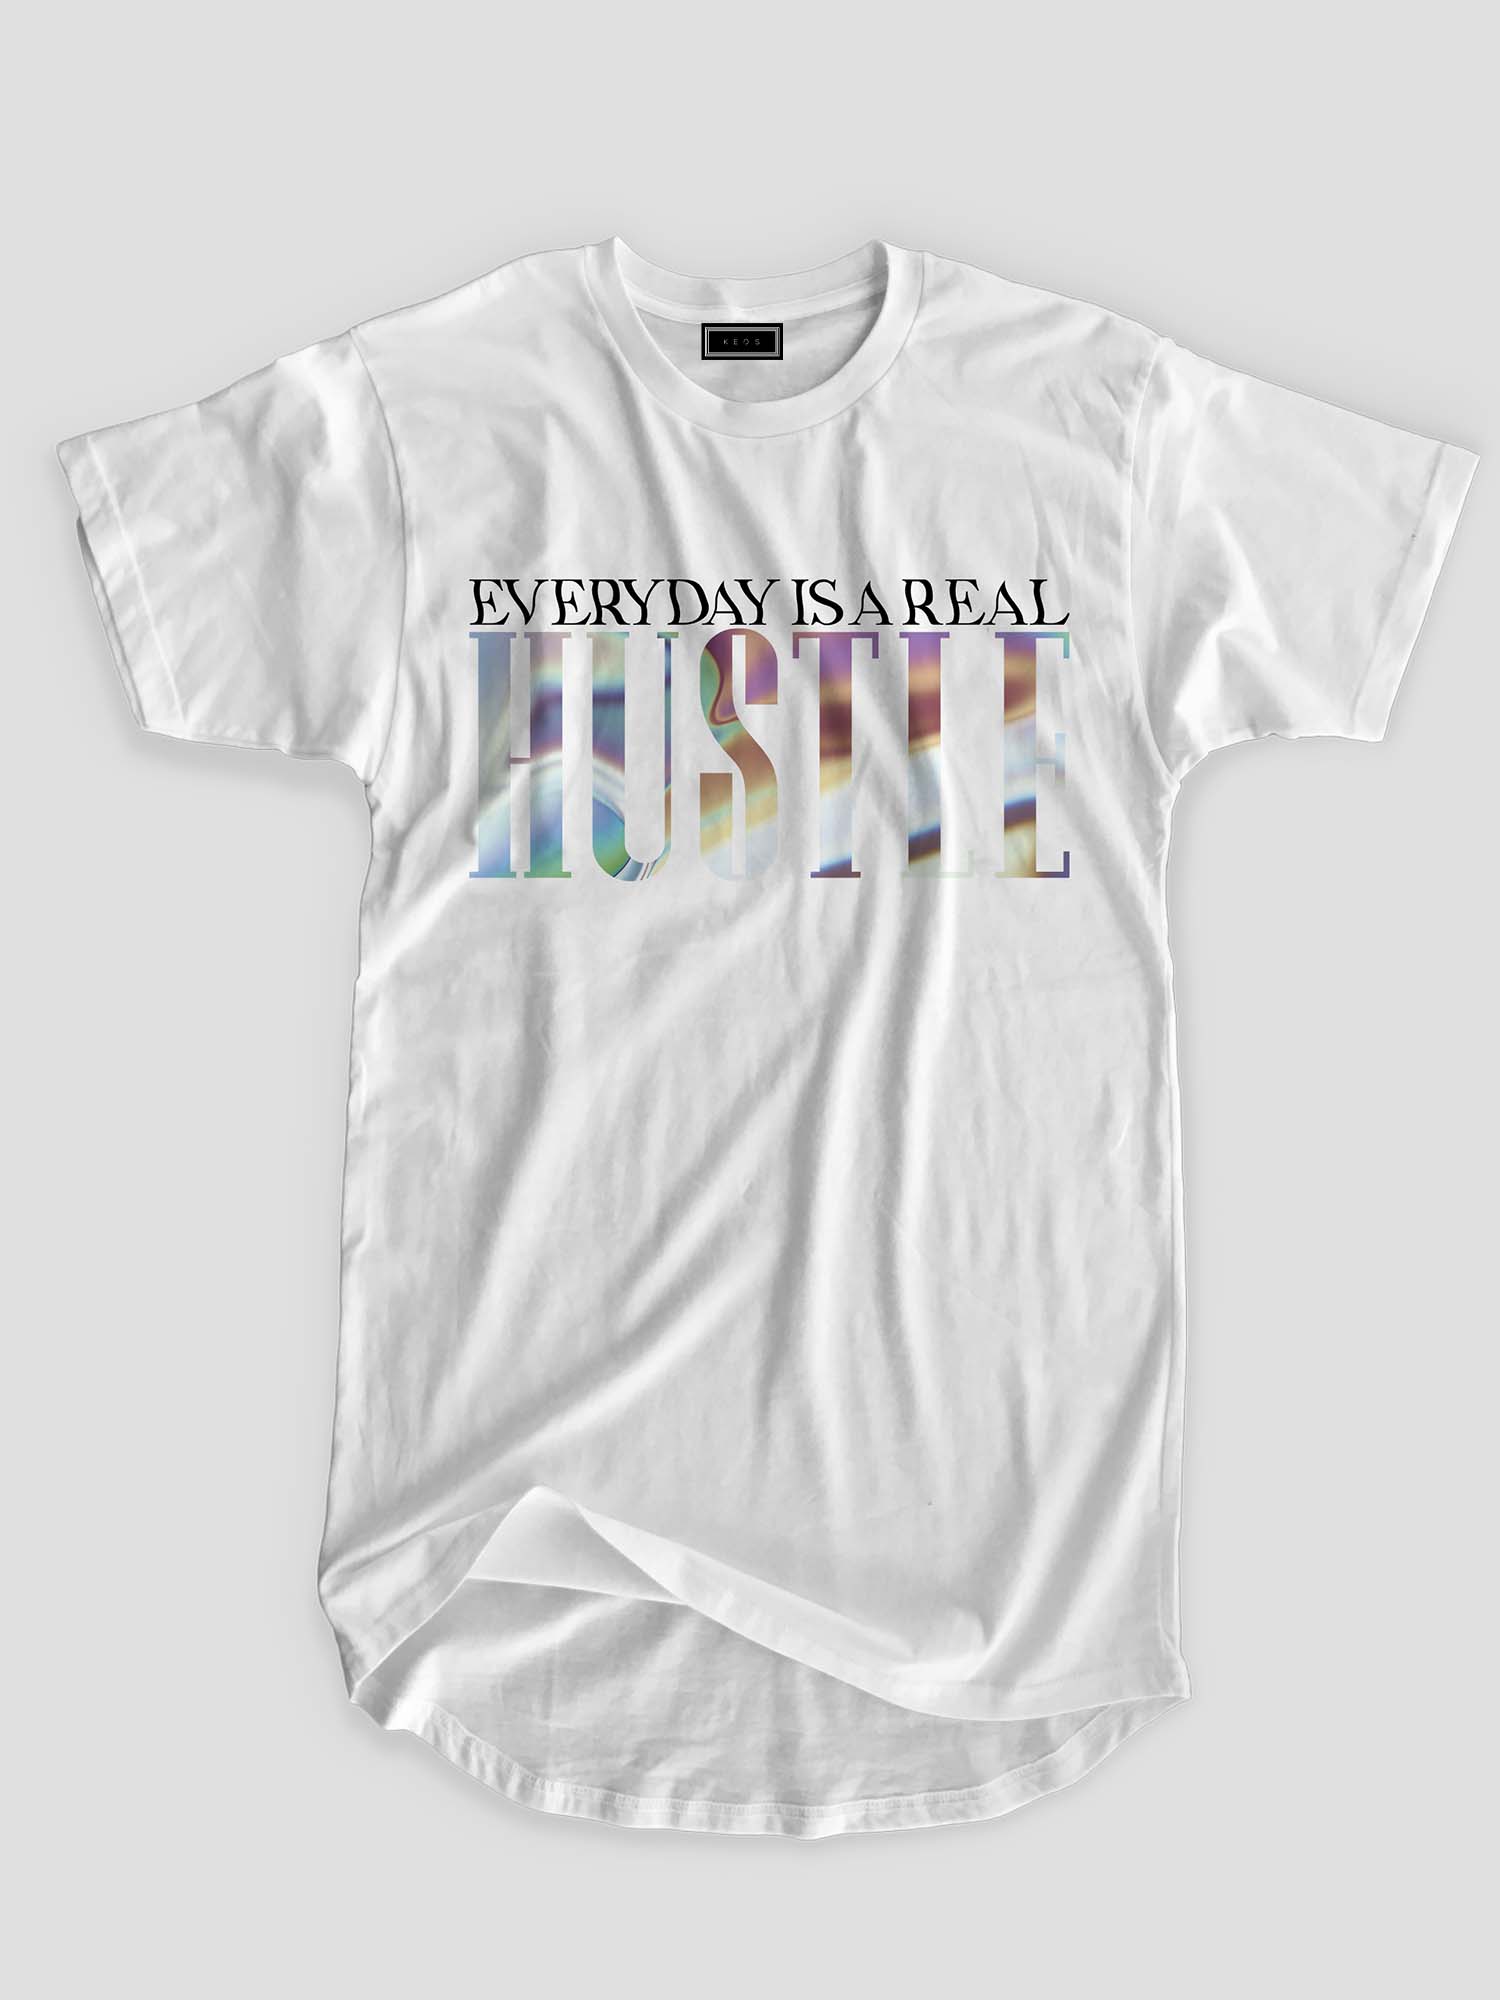 Longline Everyday is a real Hustle Organic Cotton T-shirt - keos.life